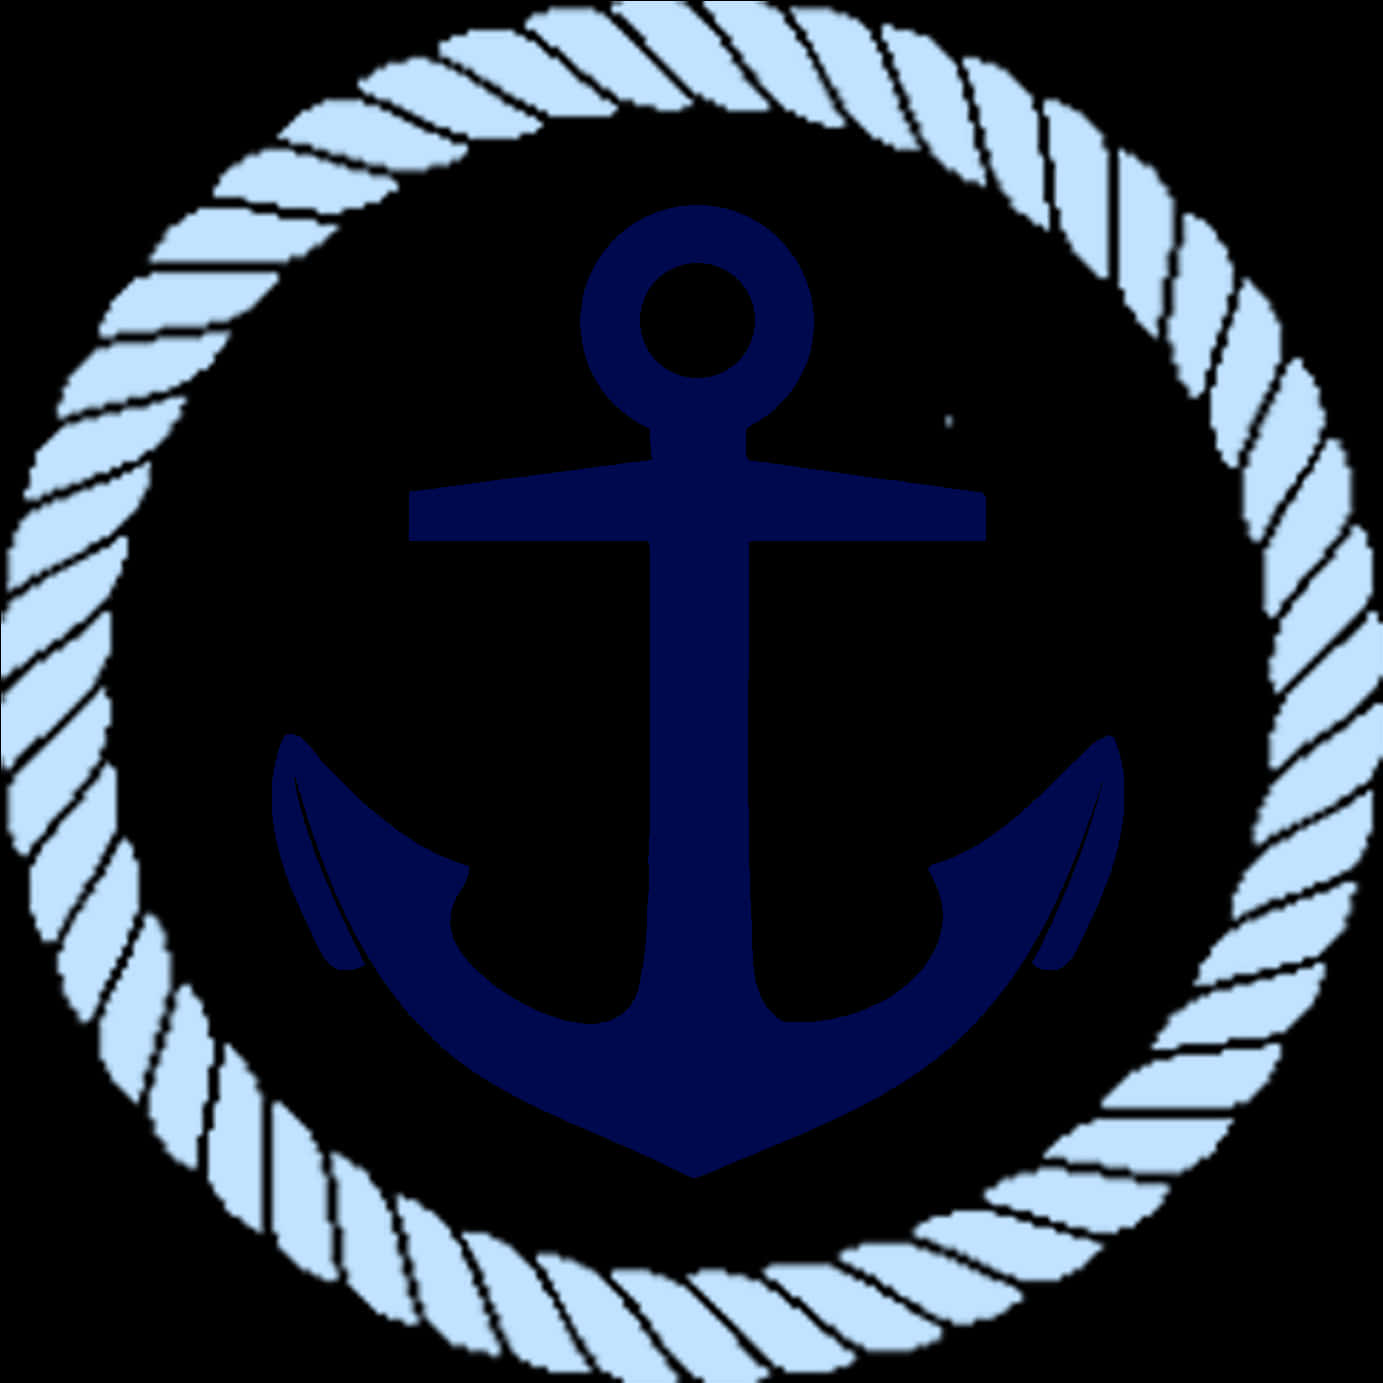 A Blue Anchor In A Circle Of Rope